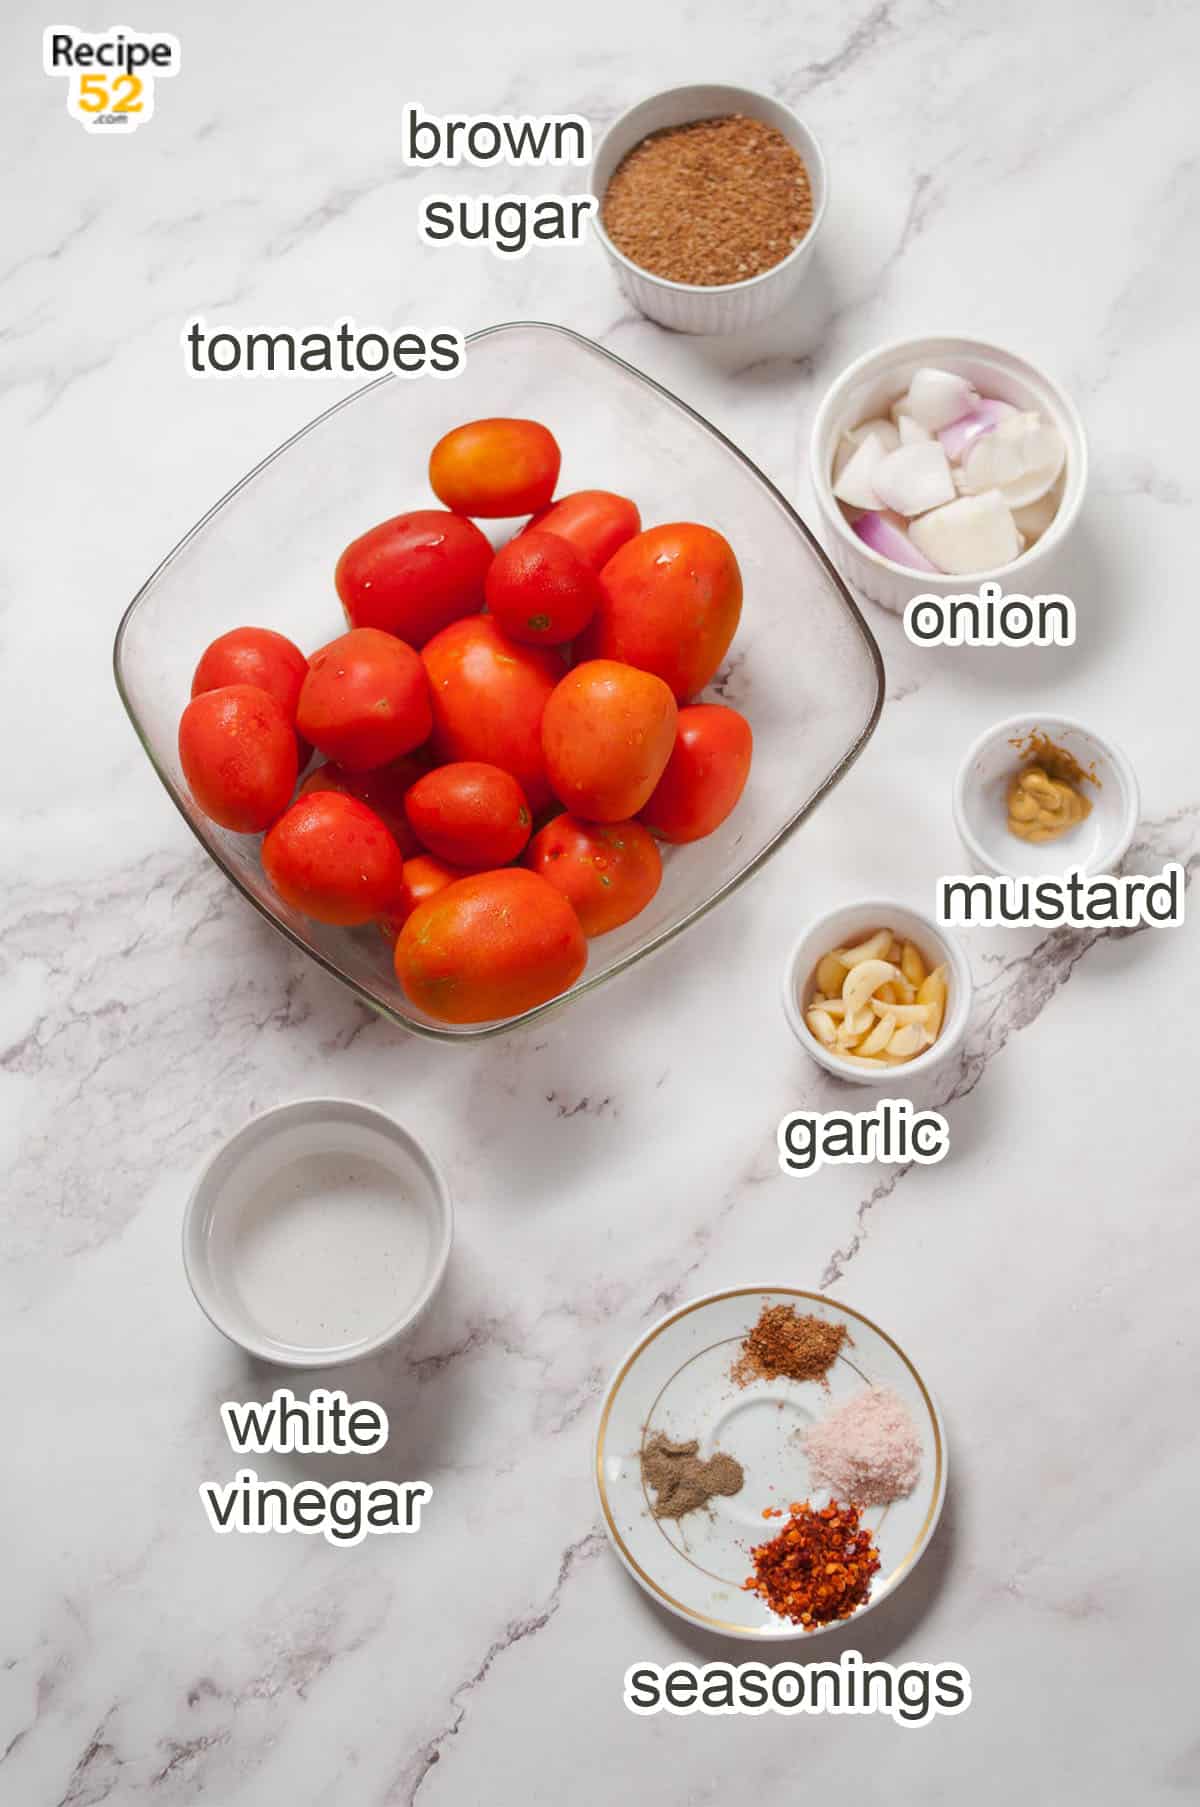 Ingredients to make the Homemade ketchup from fresh tomatoes.